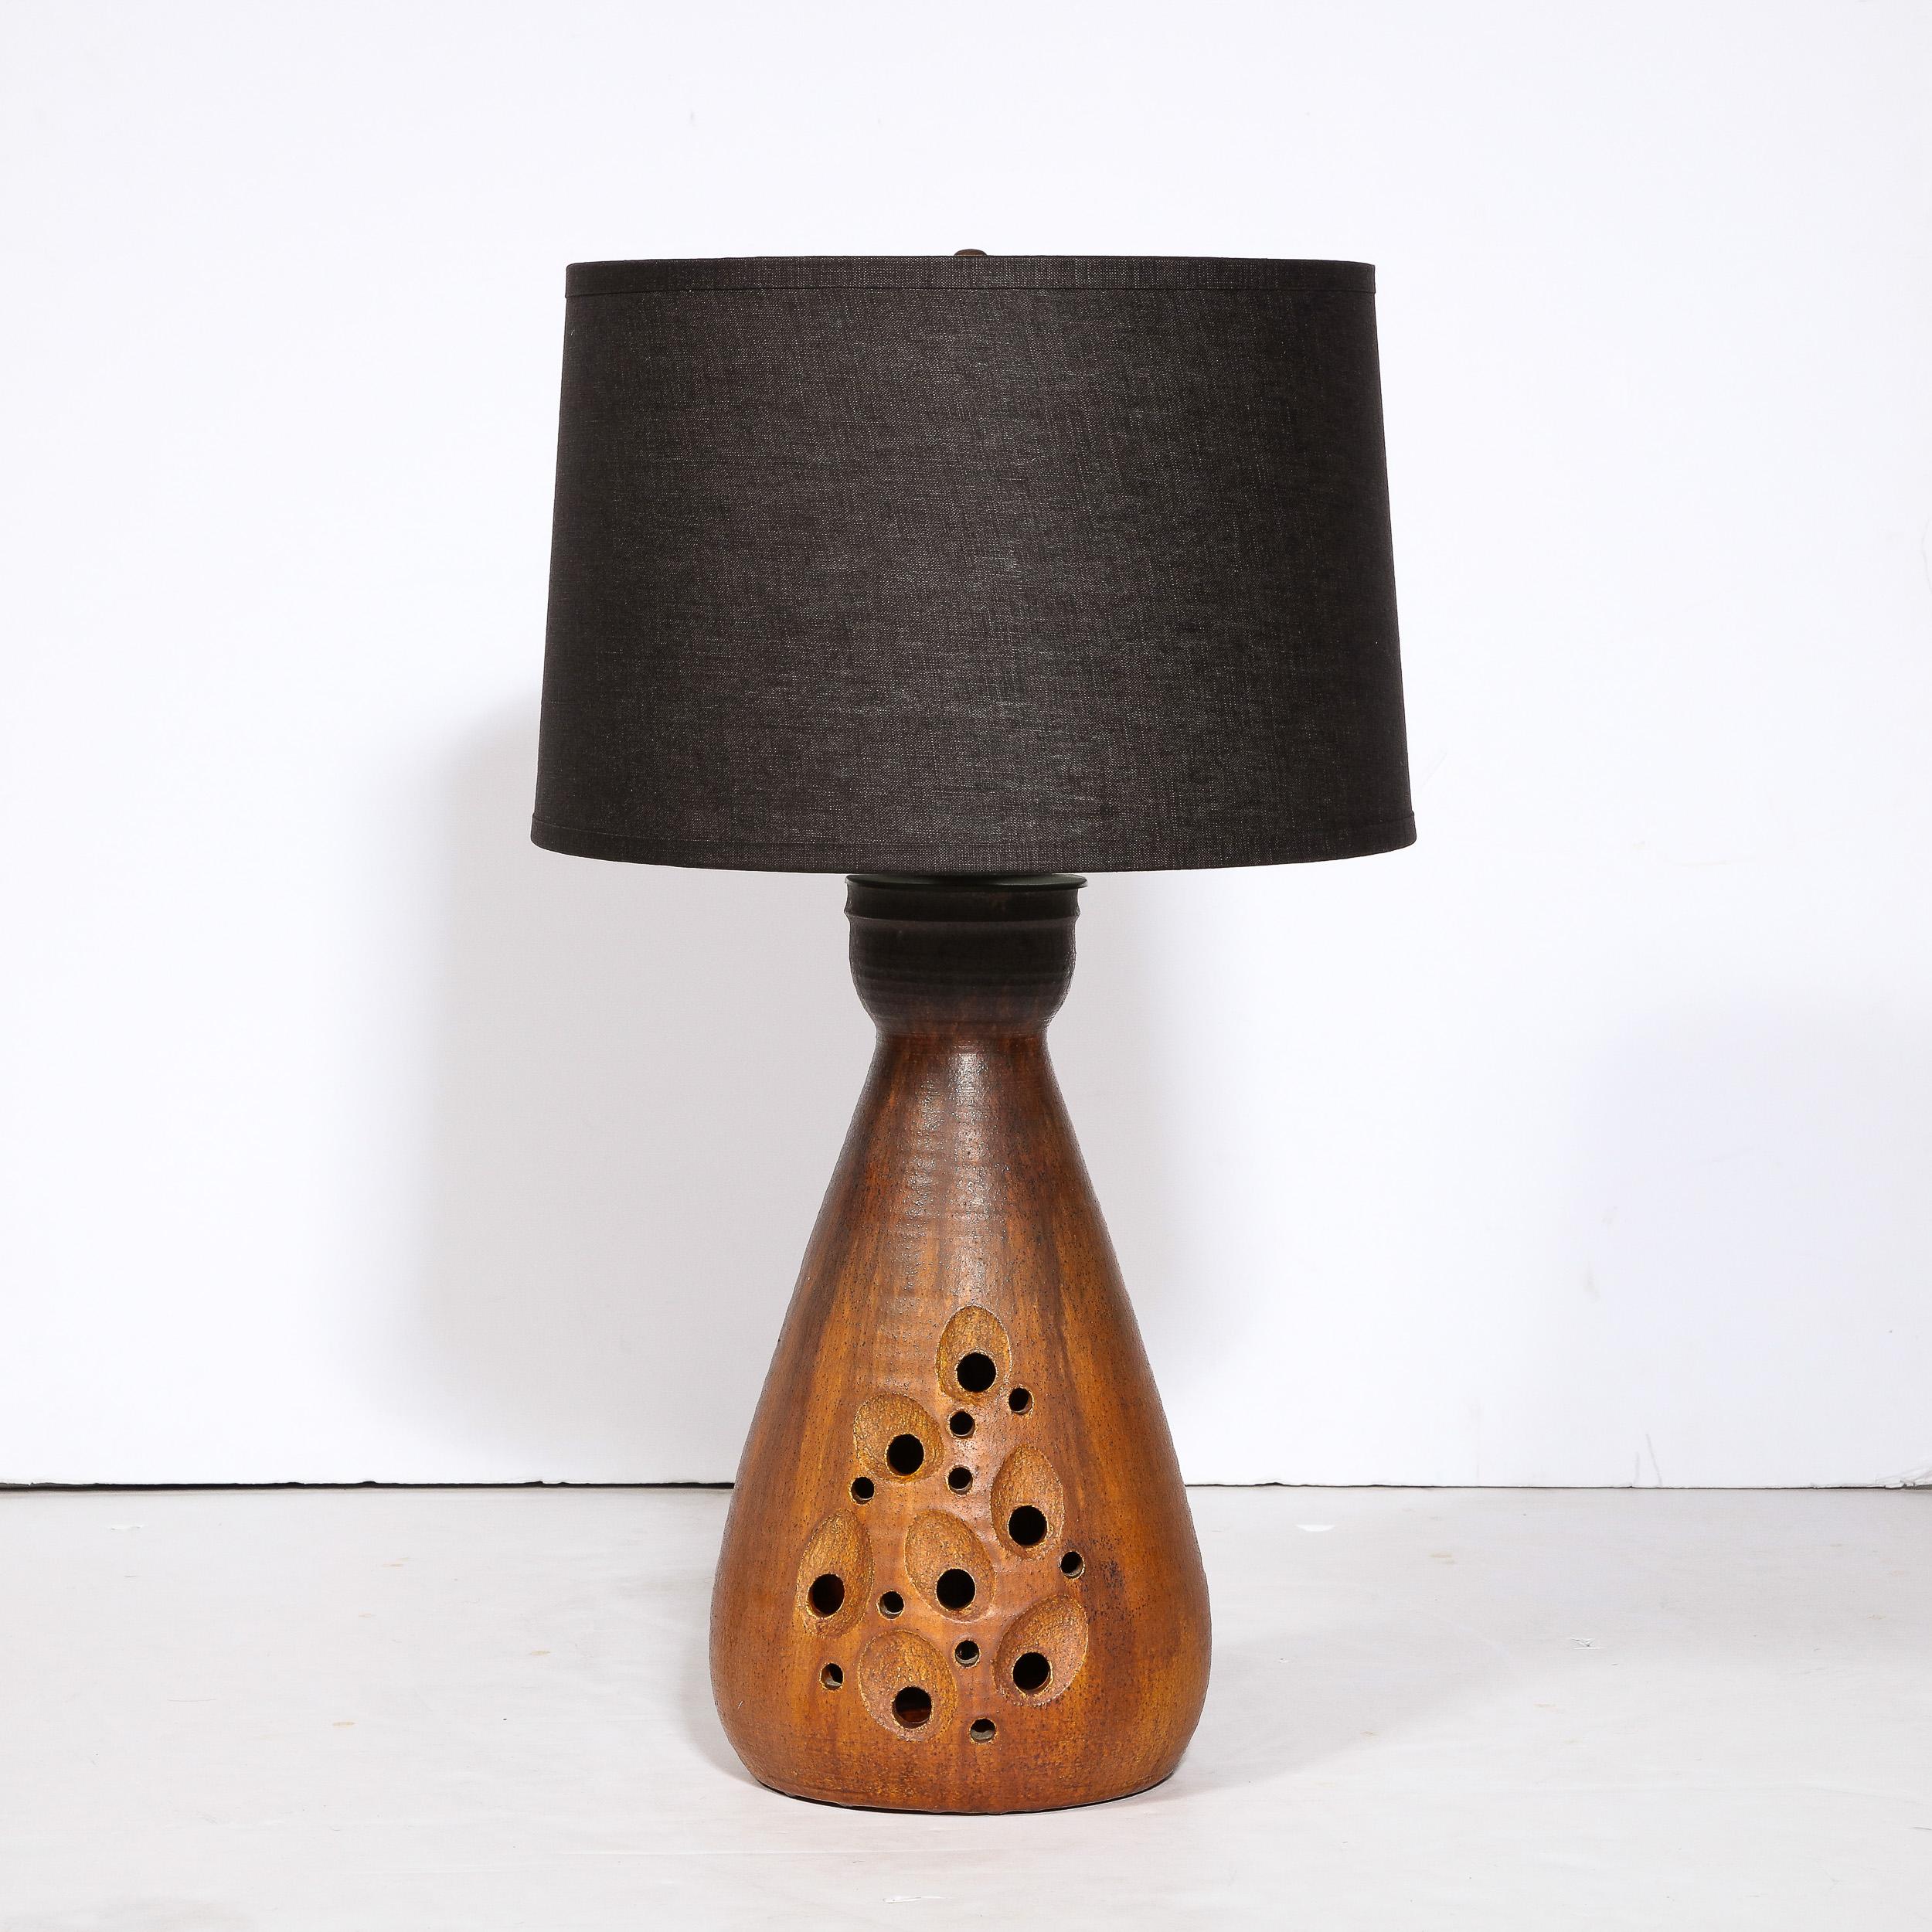 This elegant and sophisticated Mid-Century Modern ceramic table lamp was realized in France, circa 1960. It features a tear drop form realized in a red oxide glaze that transitions in a sophisticated gradient to a slate at the flared neck. The top